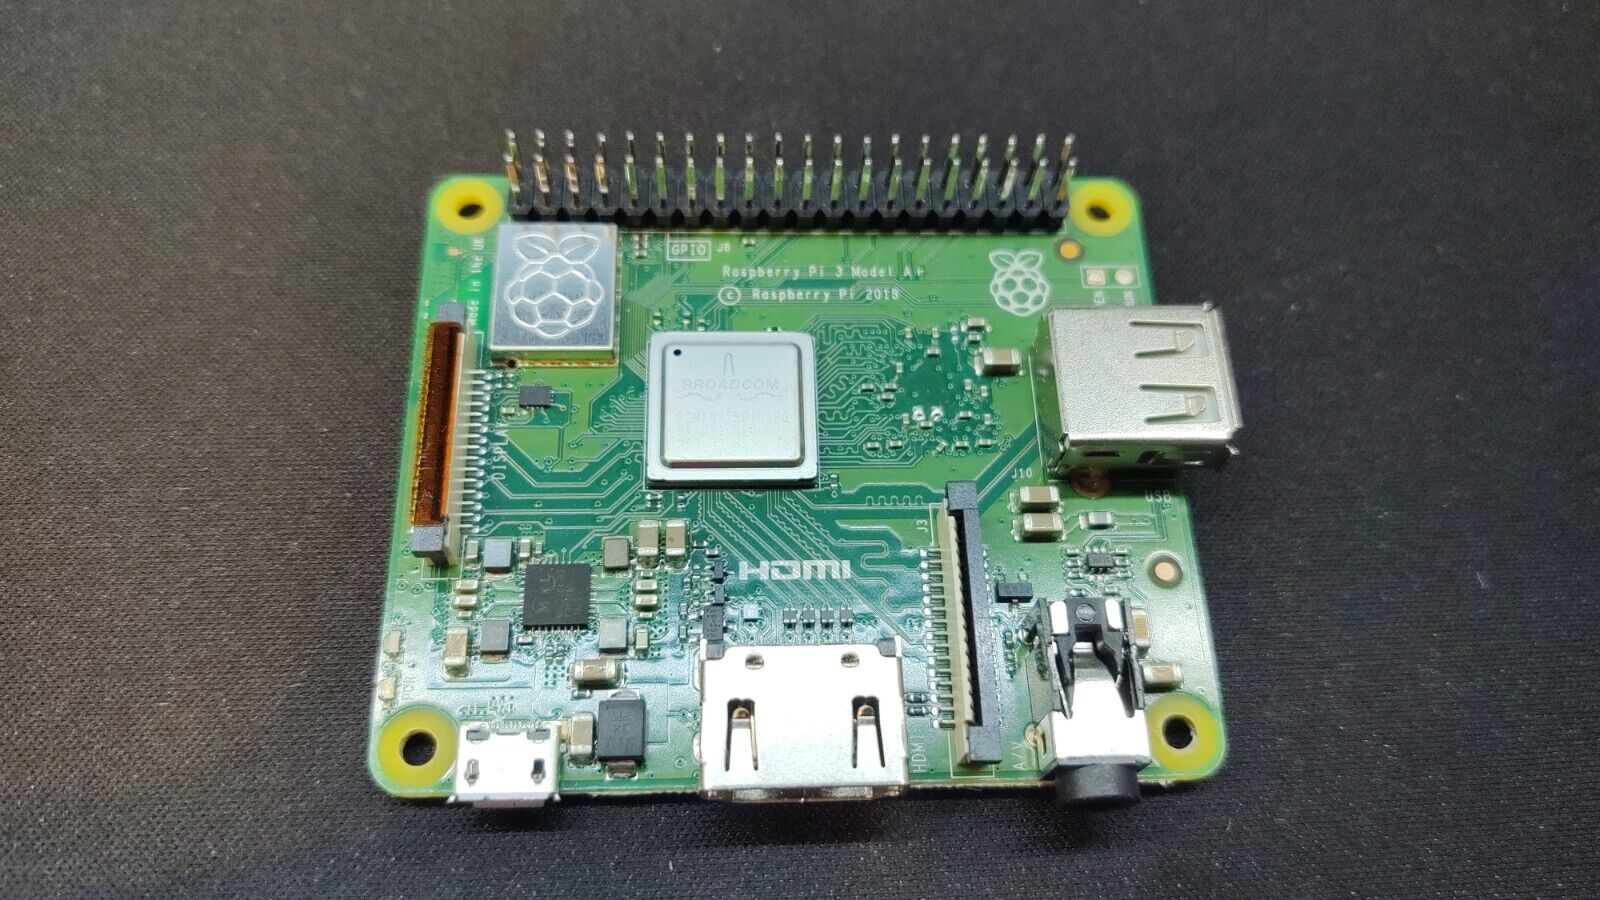 USED - Raspberry Pi 3 Model A+ Computer Board 1.4GHz 512MB